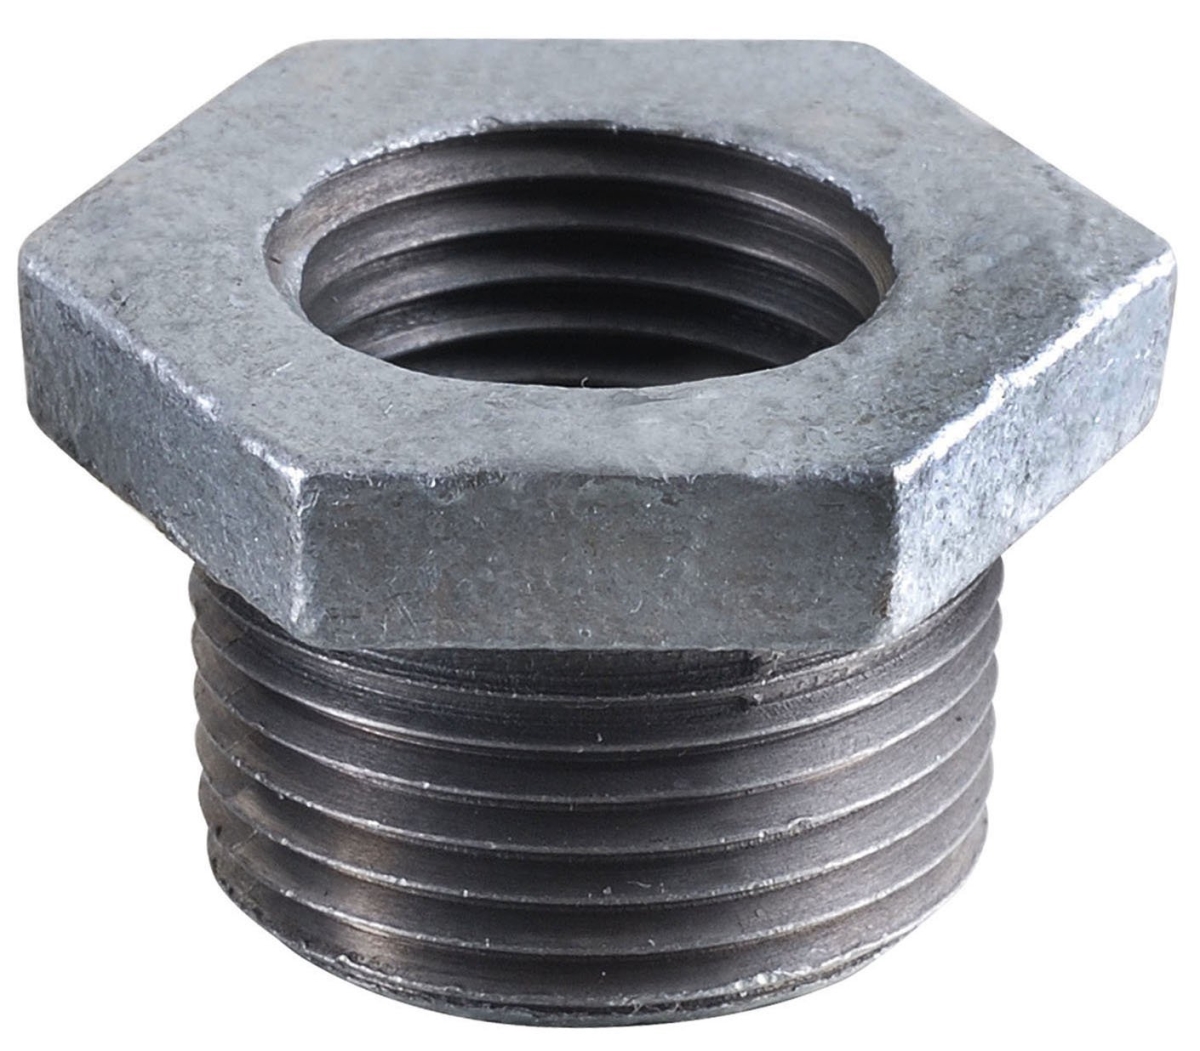 Picture of B & K 511-940HC 0.75 x 0.12 in. Galvanized Iron Hex Bushing